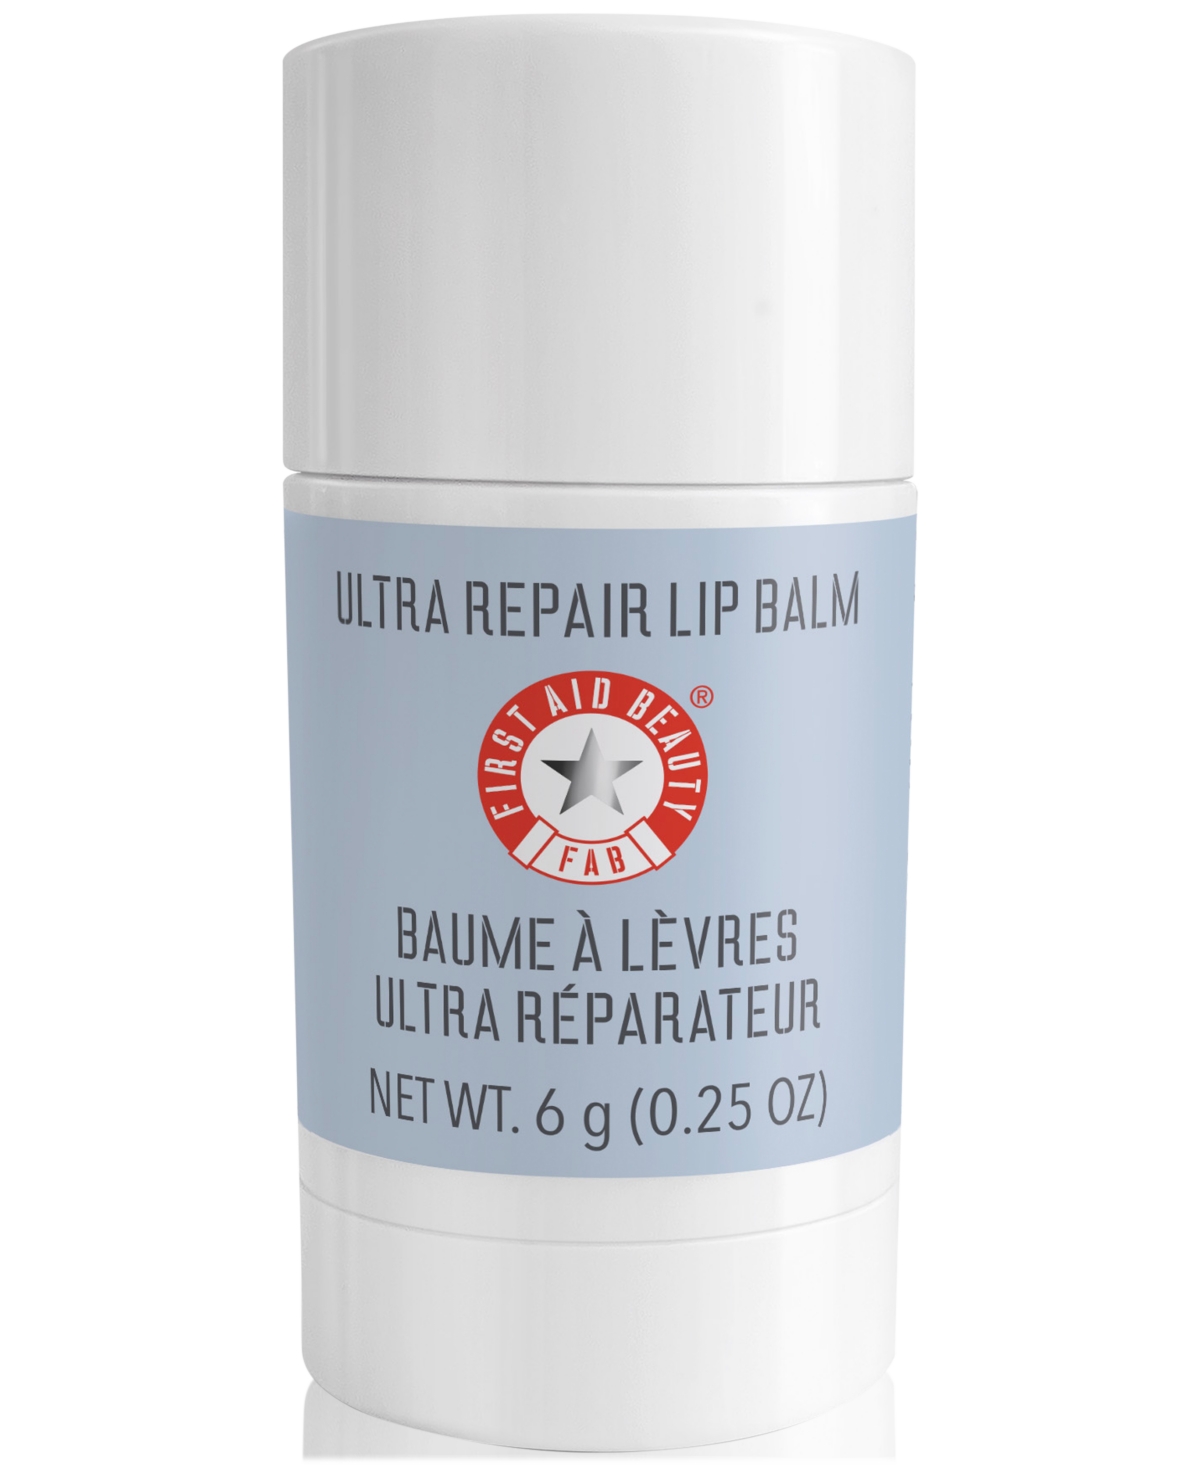 First Aid Beauty Ultra Repair Lip Balm, 0.25 Oz. In No Color